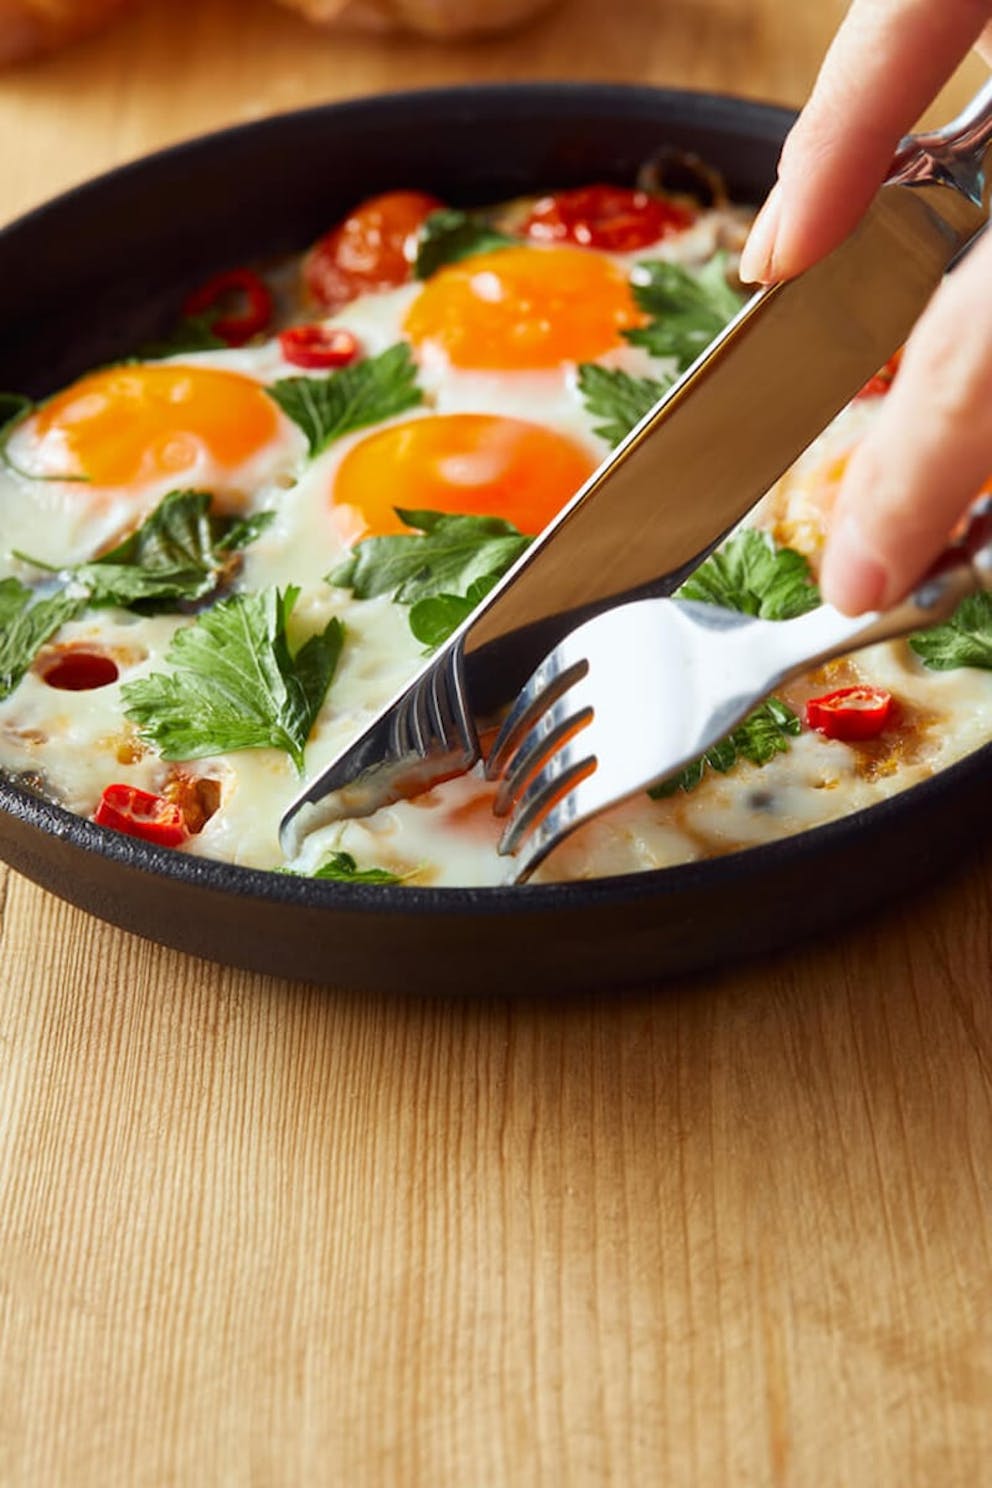 A person eating fried eggs with parsley and chili peppers on a wooden table with fork and knife. | Egg Yolk vs. Egg White: What’s the Difference?